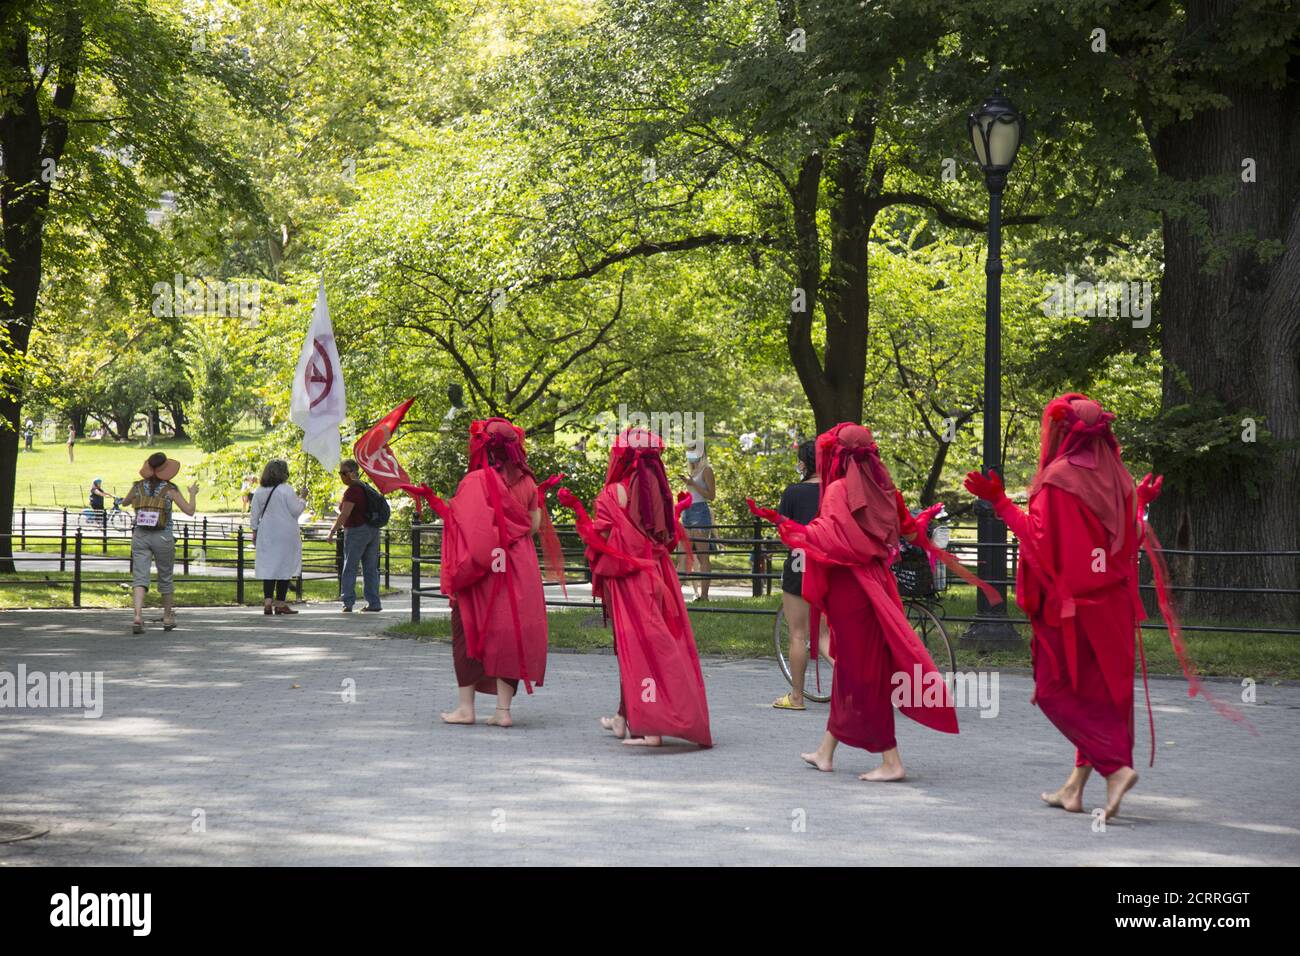 The Red Rebels, Brigade, who are a branch of Extinction Rebellion, dressed in bright red to signify the blood of species that have died as a result of climate change, as well as those that will die in the future demonstrate and march at Bethesda Fountain in Central Park organized by 'Extinction Rebellion' to bring attention to the immediate need for system change in the US and around the world to combat  the climate crisis that is now being experienced world wide in the form of wildfires, hurricanes, droughts and floods along with air and water pollution at an unprecedented scale. Stock Photo